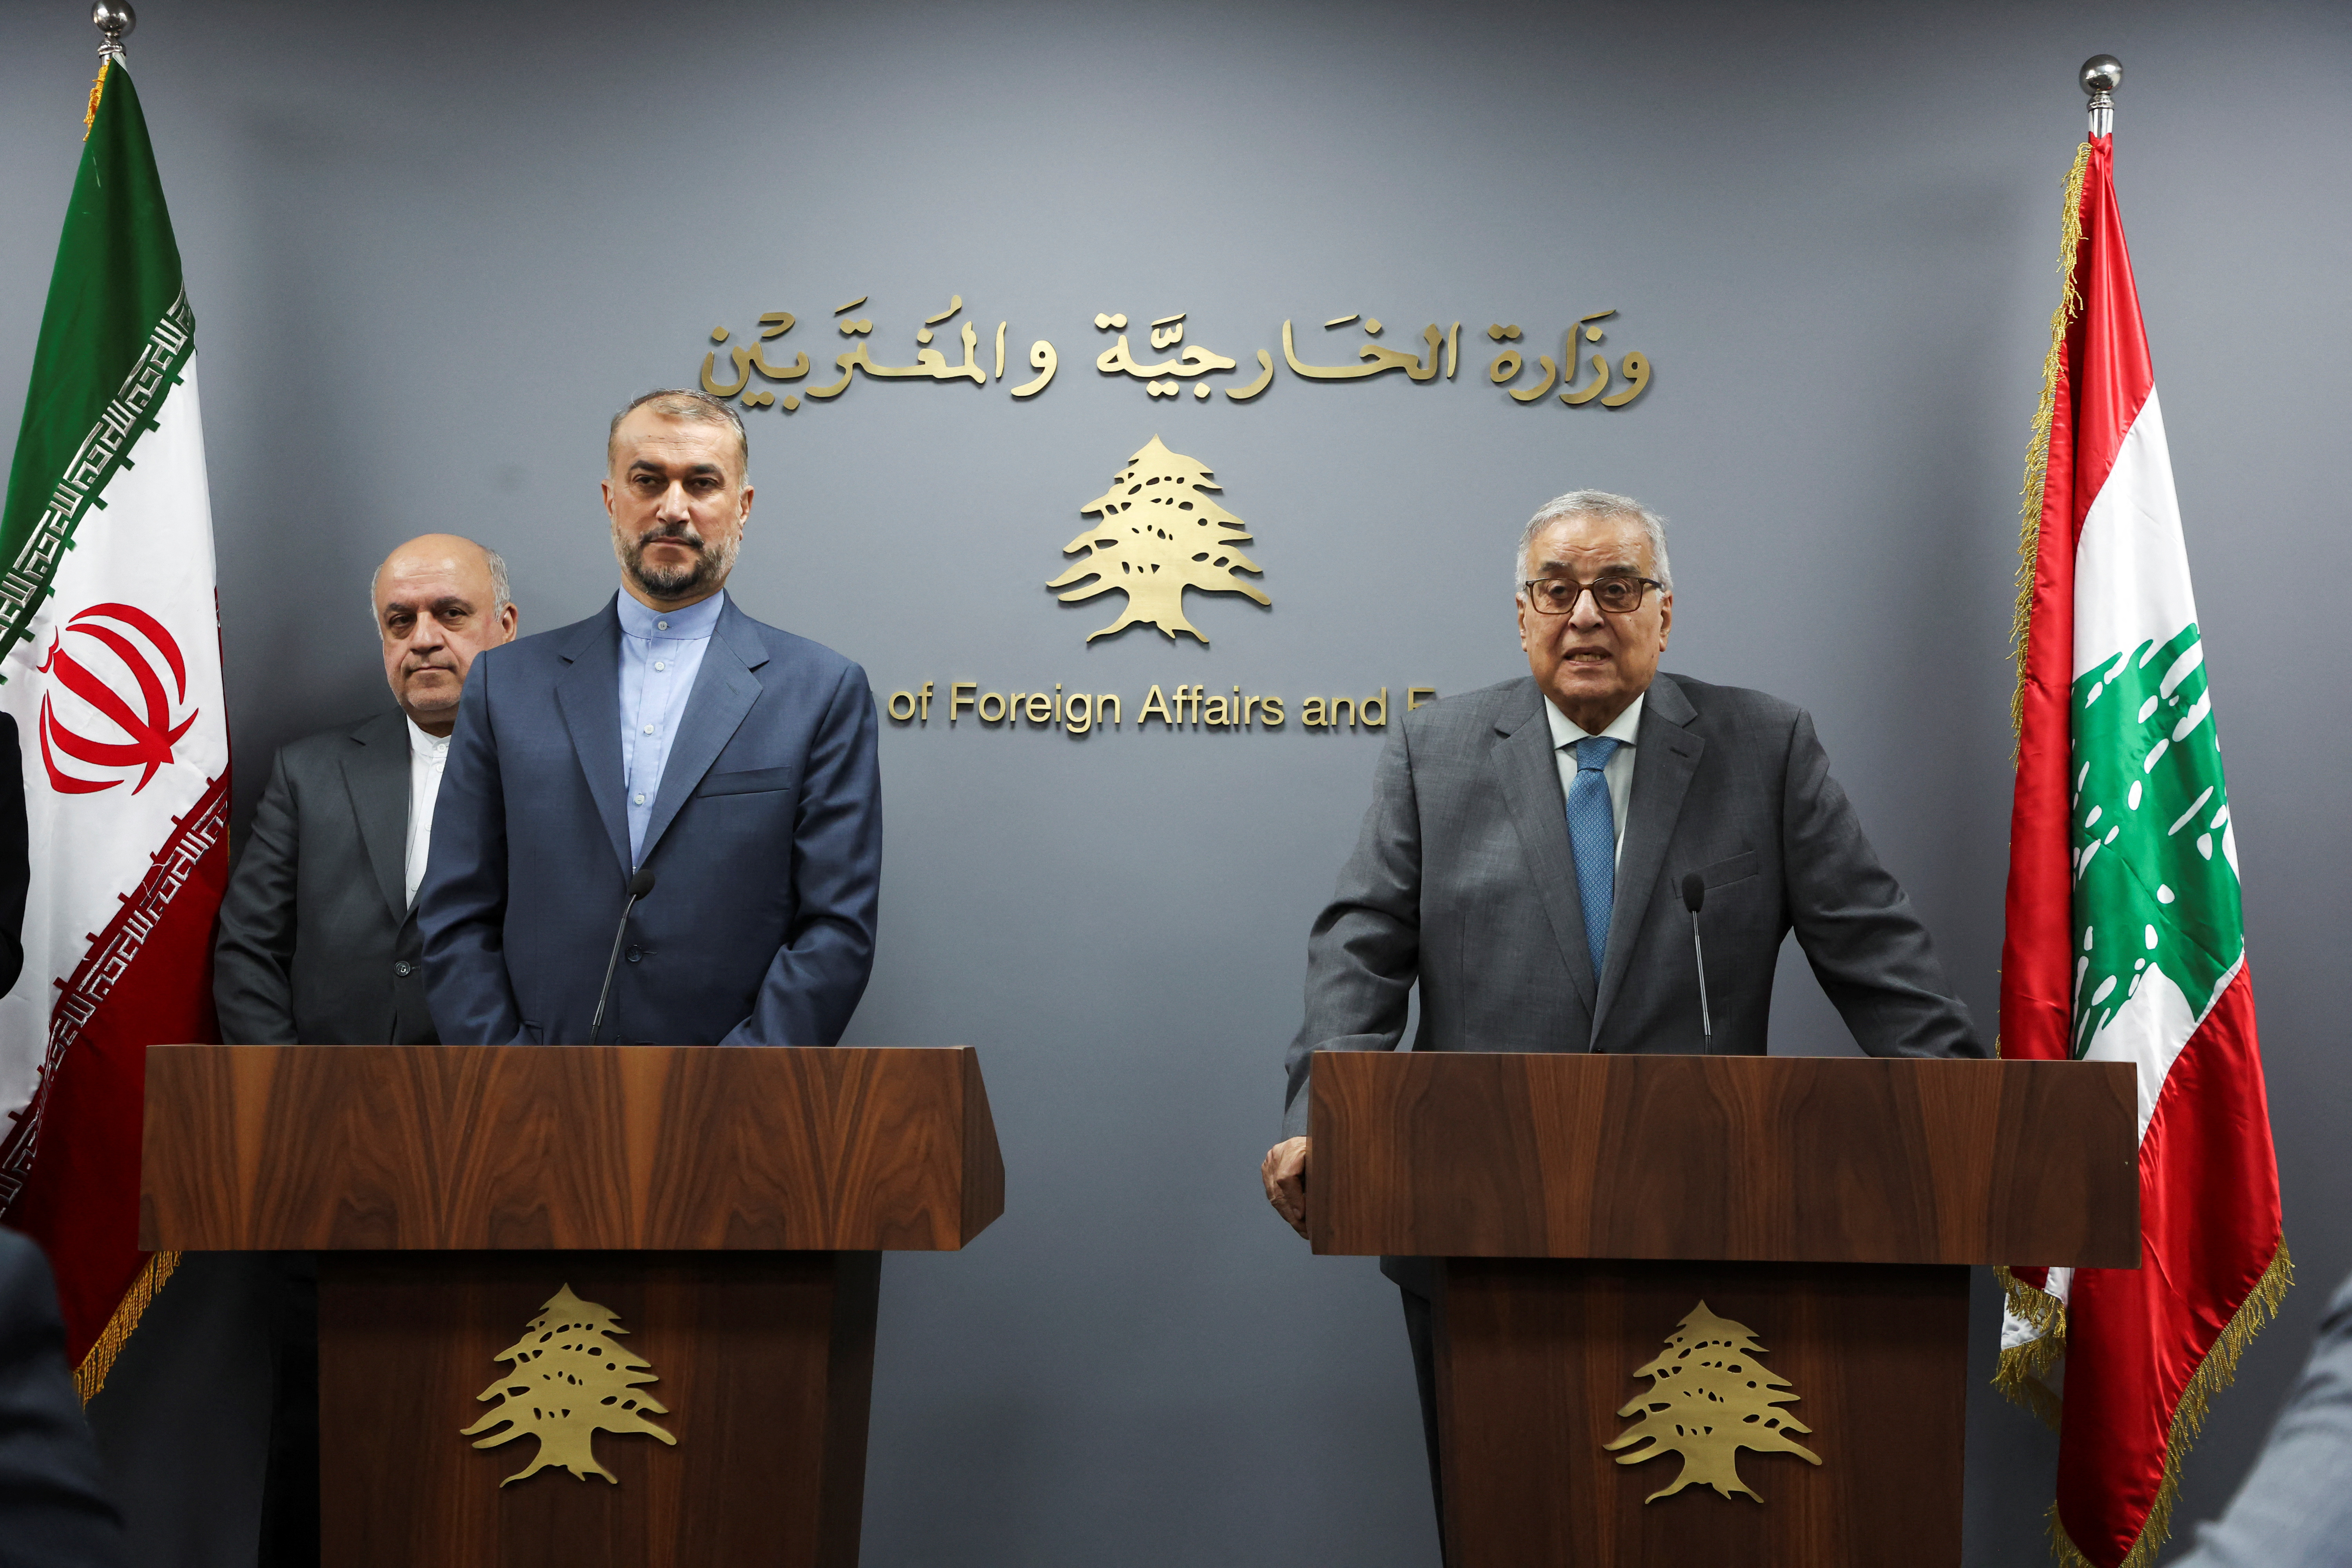 Lebanon's caretaker Foreign Minister Abdallah Bou Habib and Iranian Foreign Minister Hossein Amirabdollahian attend a joint press conference in Beirut